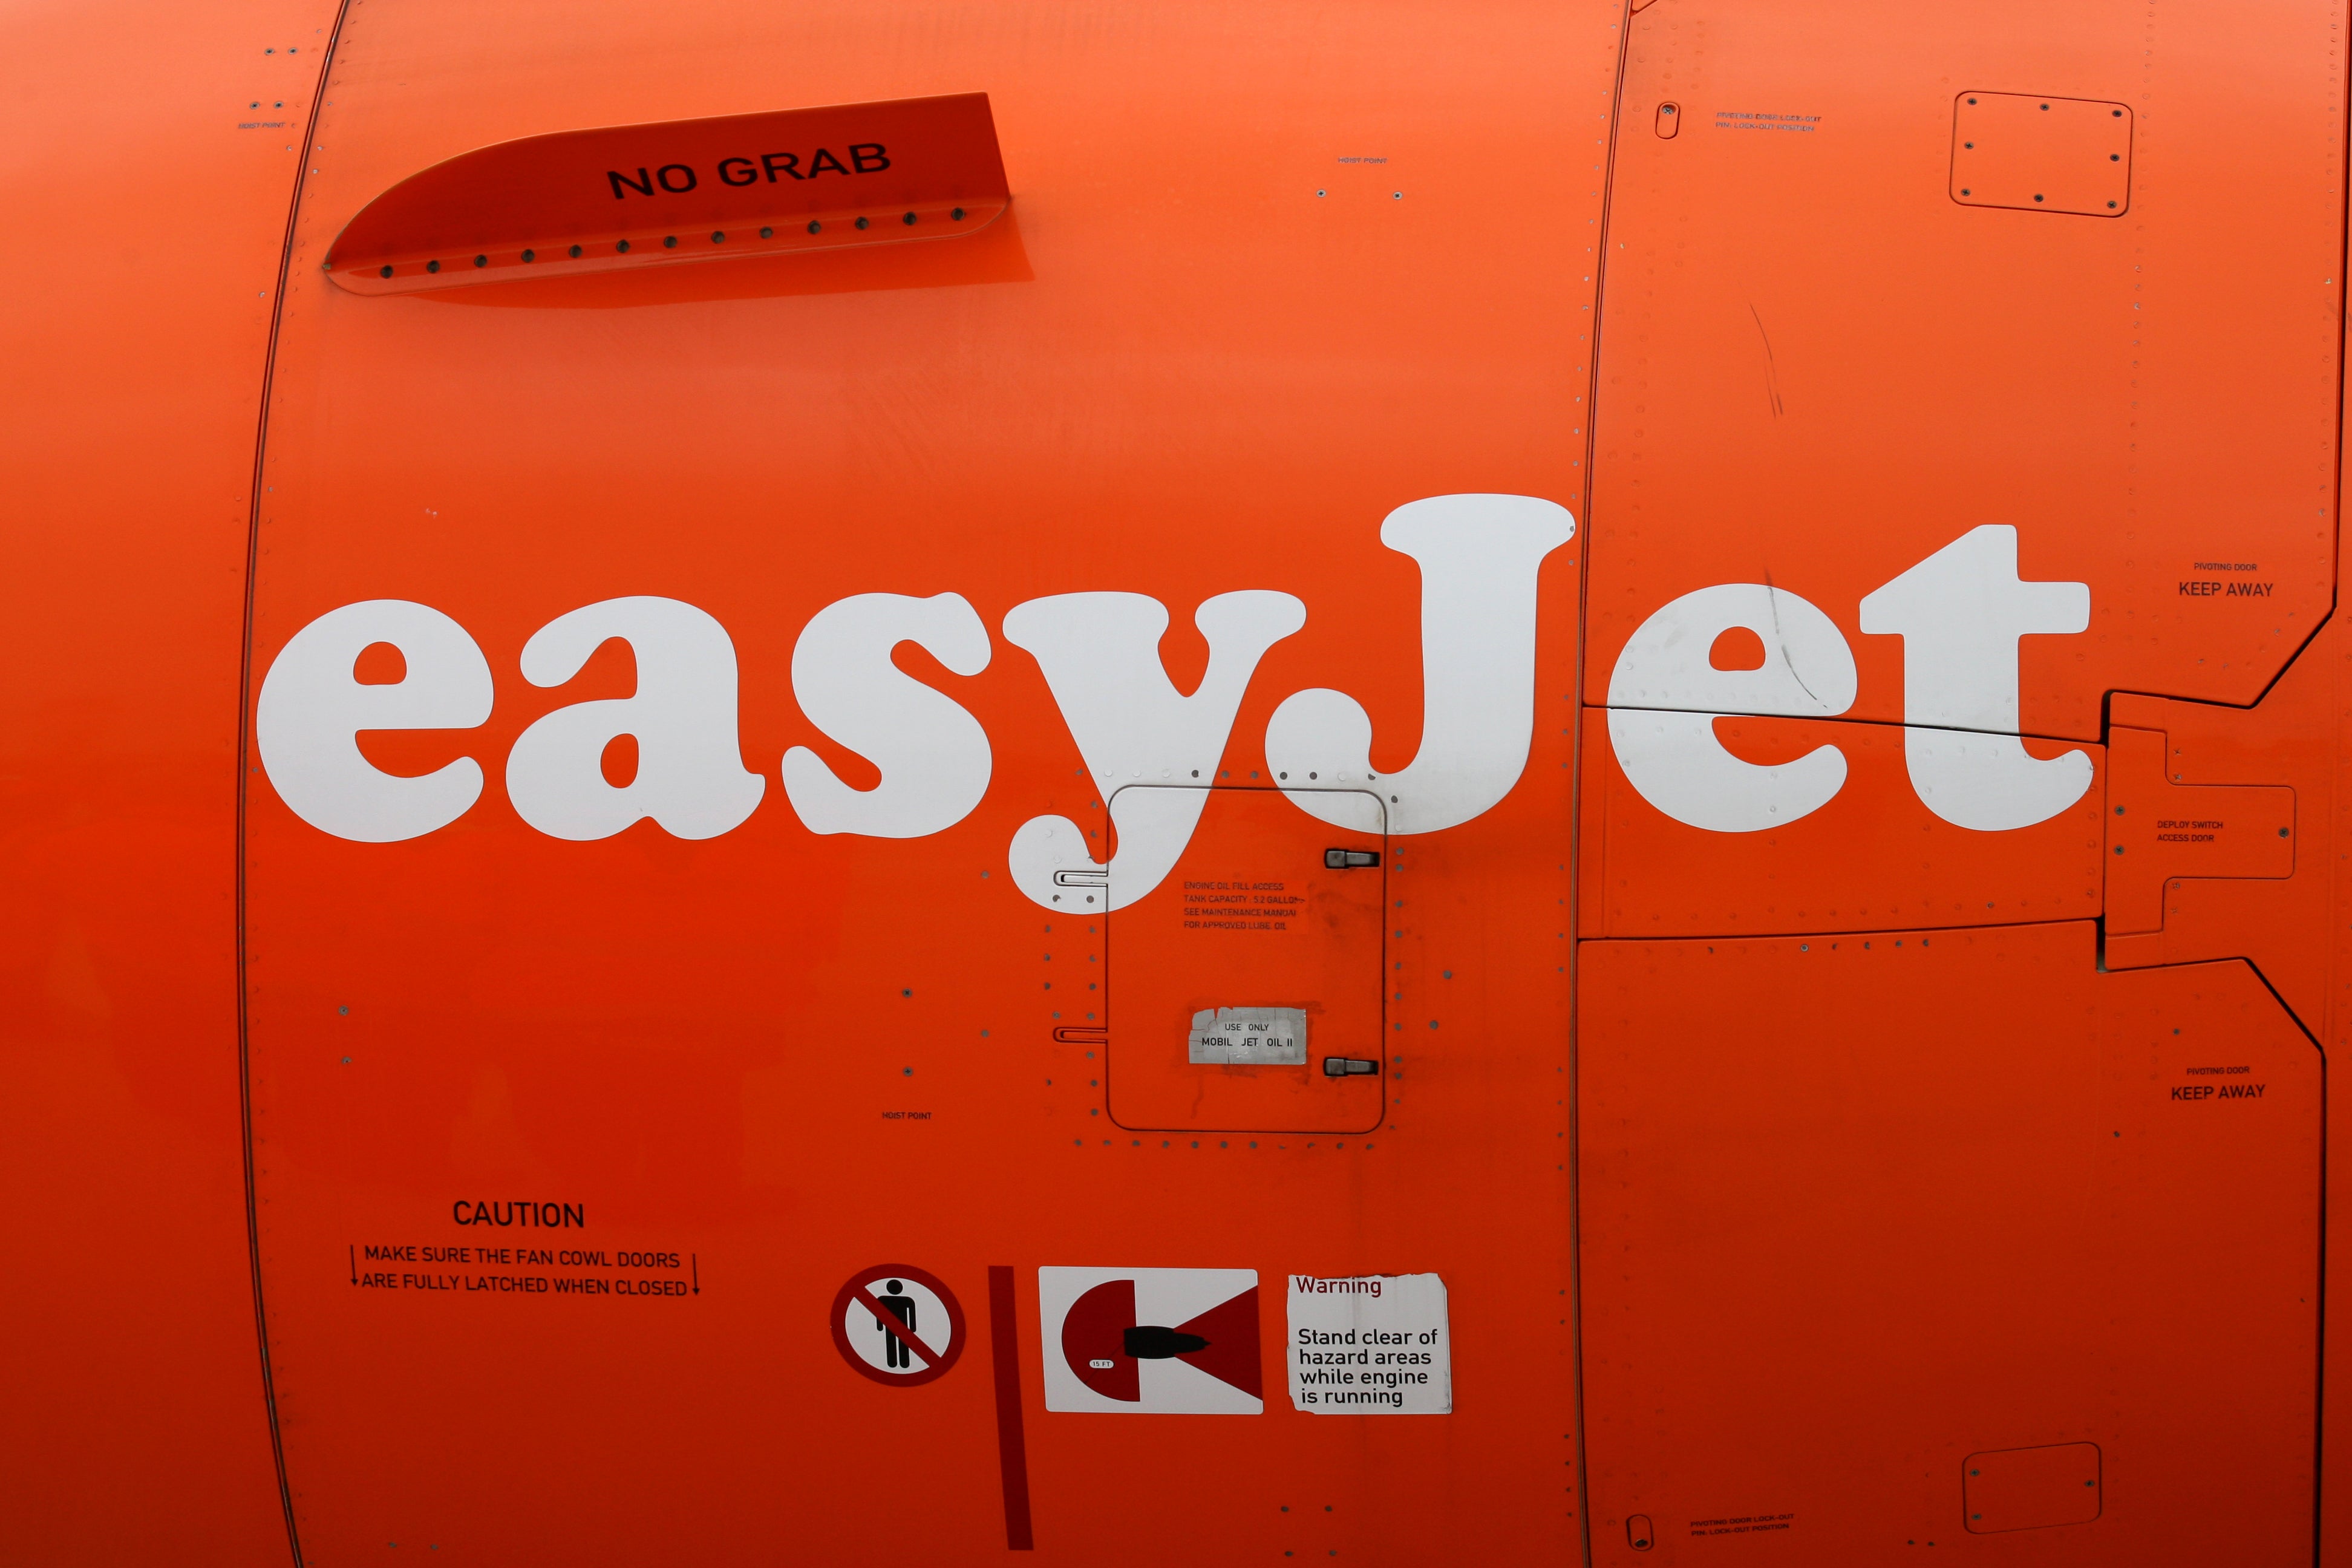 Low-cost airline easyJet and aerospace manufacturer Rolls-Royce have launched a partnership to develop hydrogen engines capable of powering commercial passenger planes (Chris Radburn/PA)